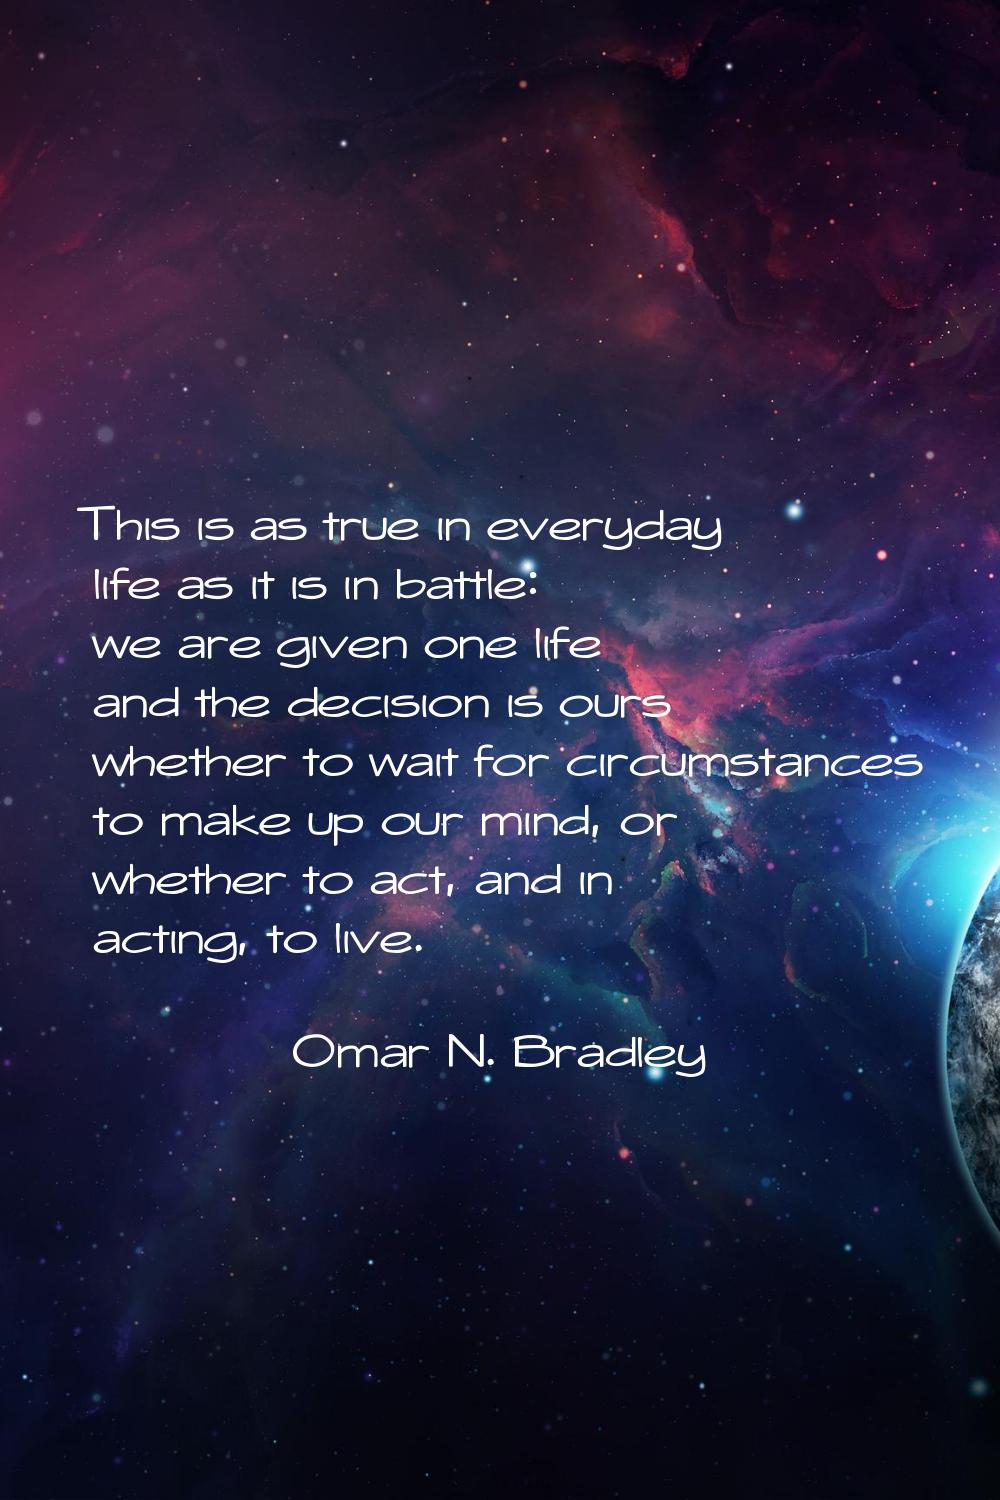 This is as true in everyday life as it is in battle: we are given one life and the decision is ours